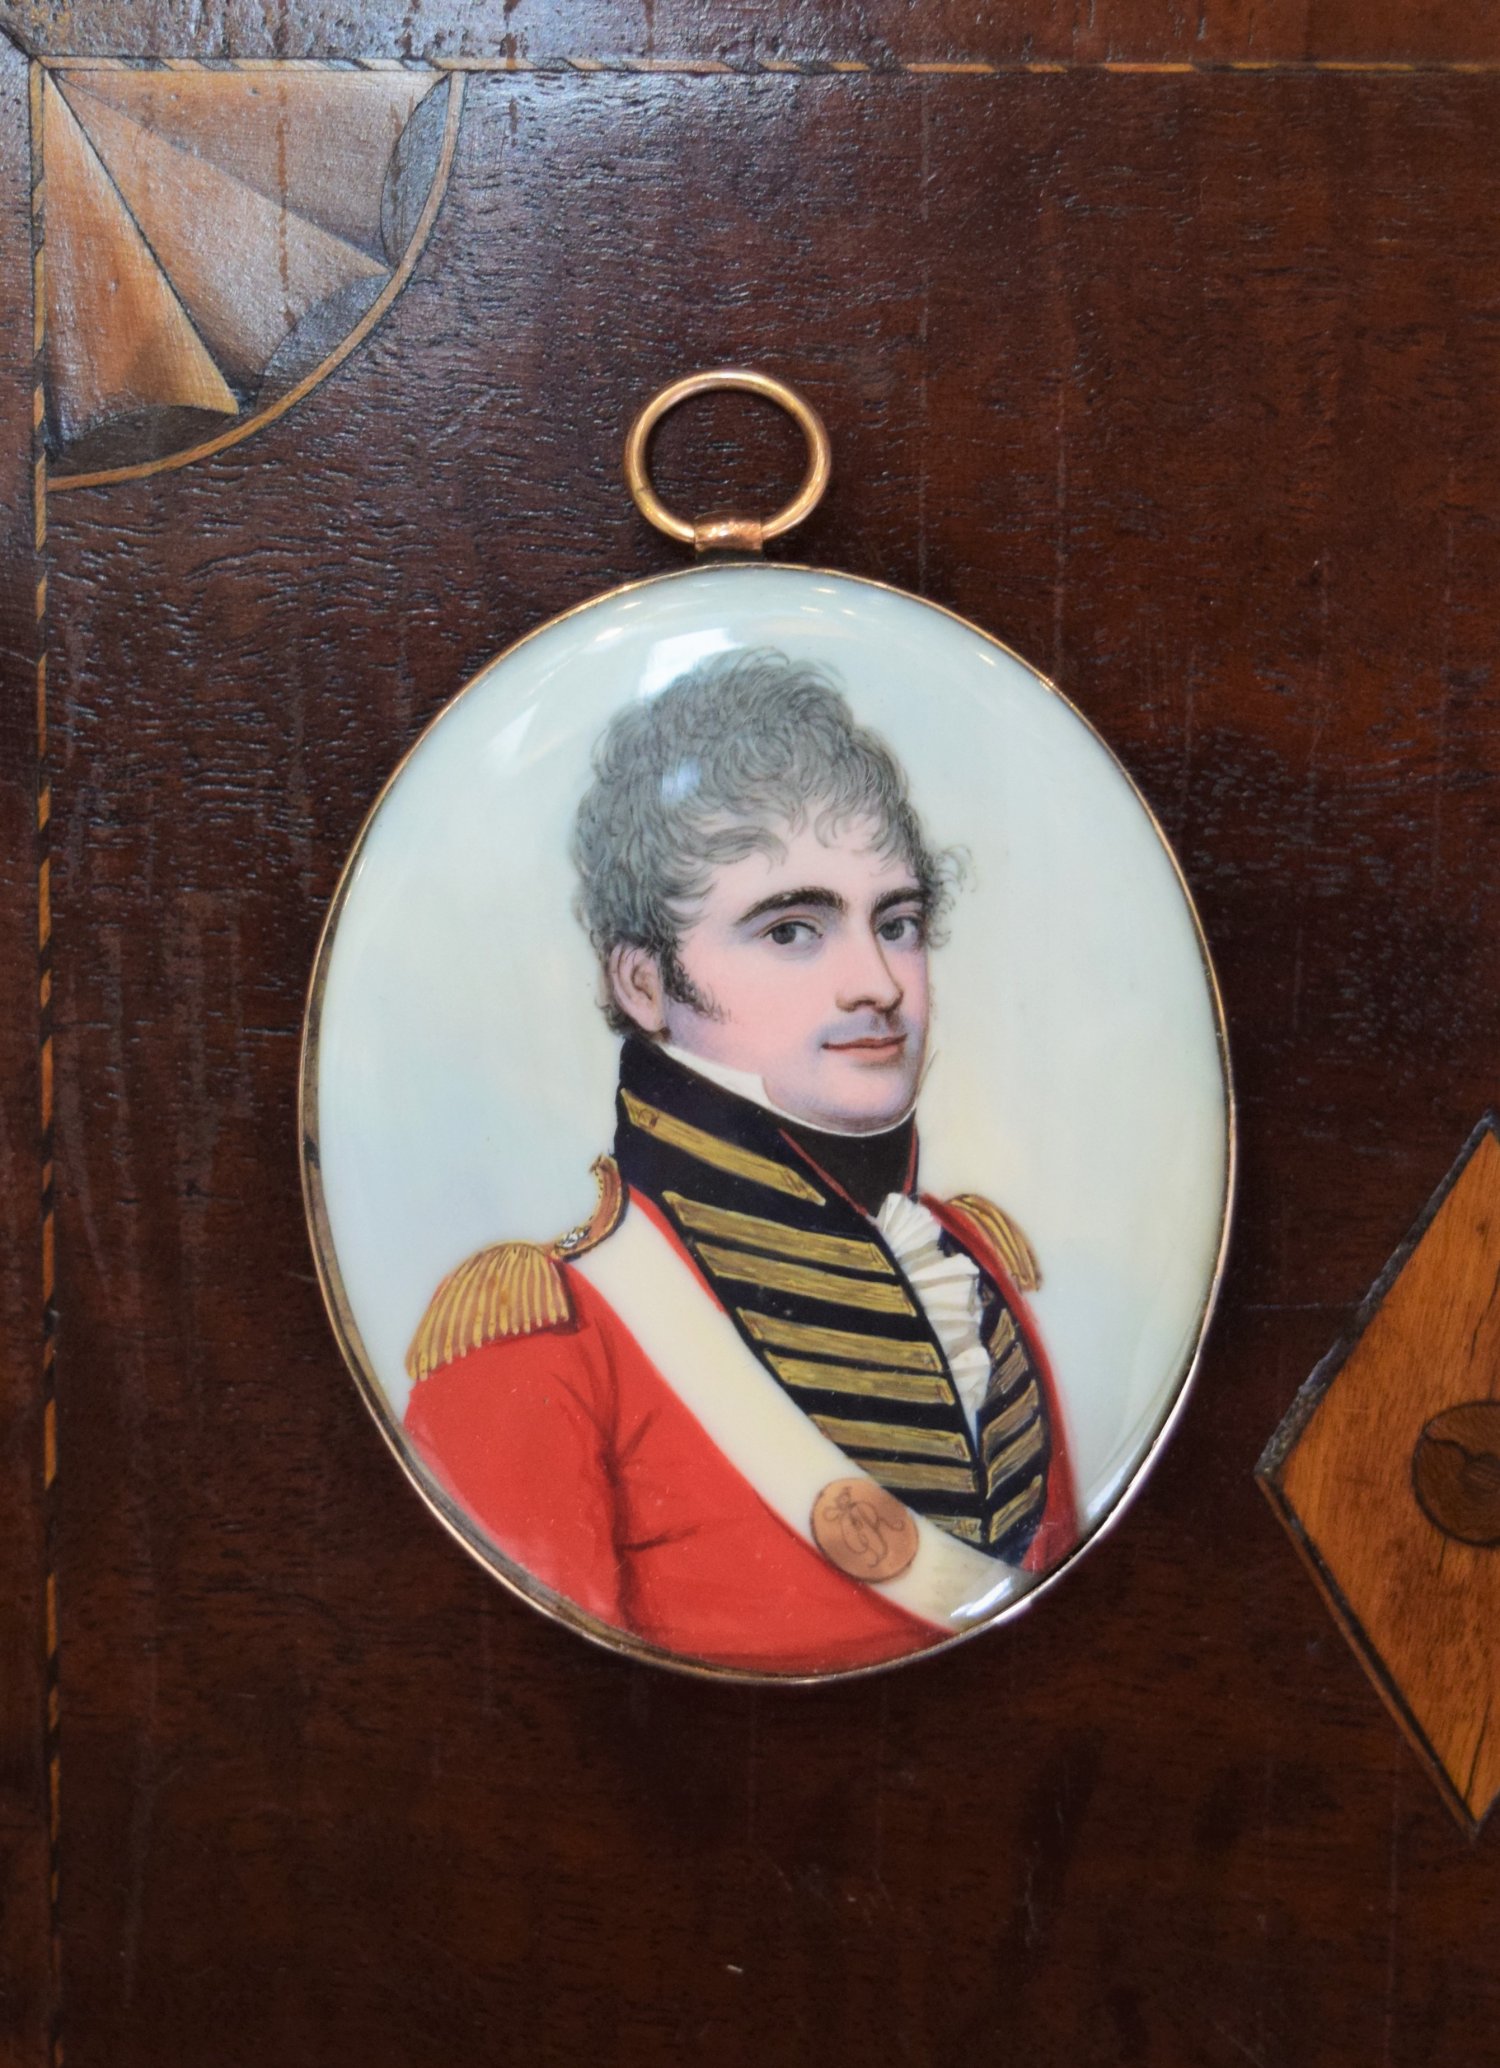 Hand-painted Portrait Miniature by Frederick Buck